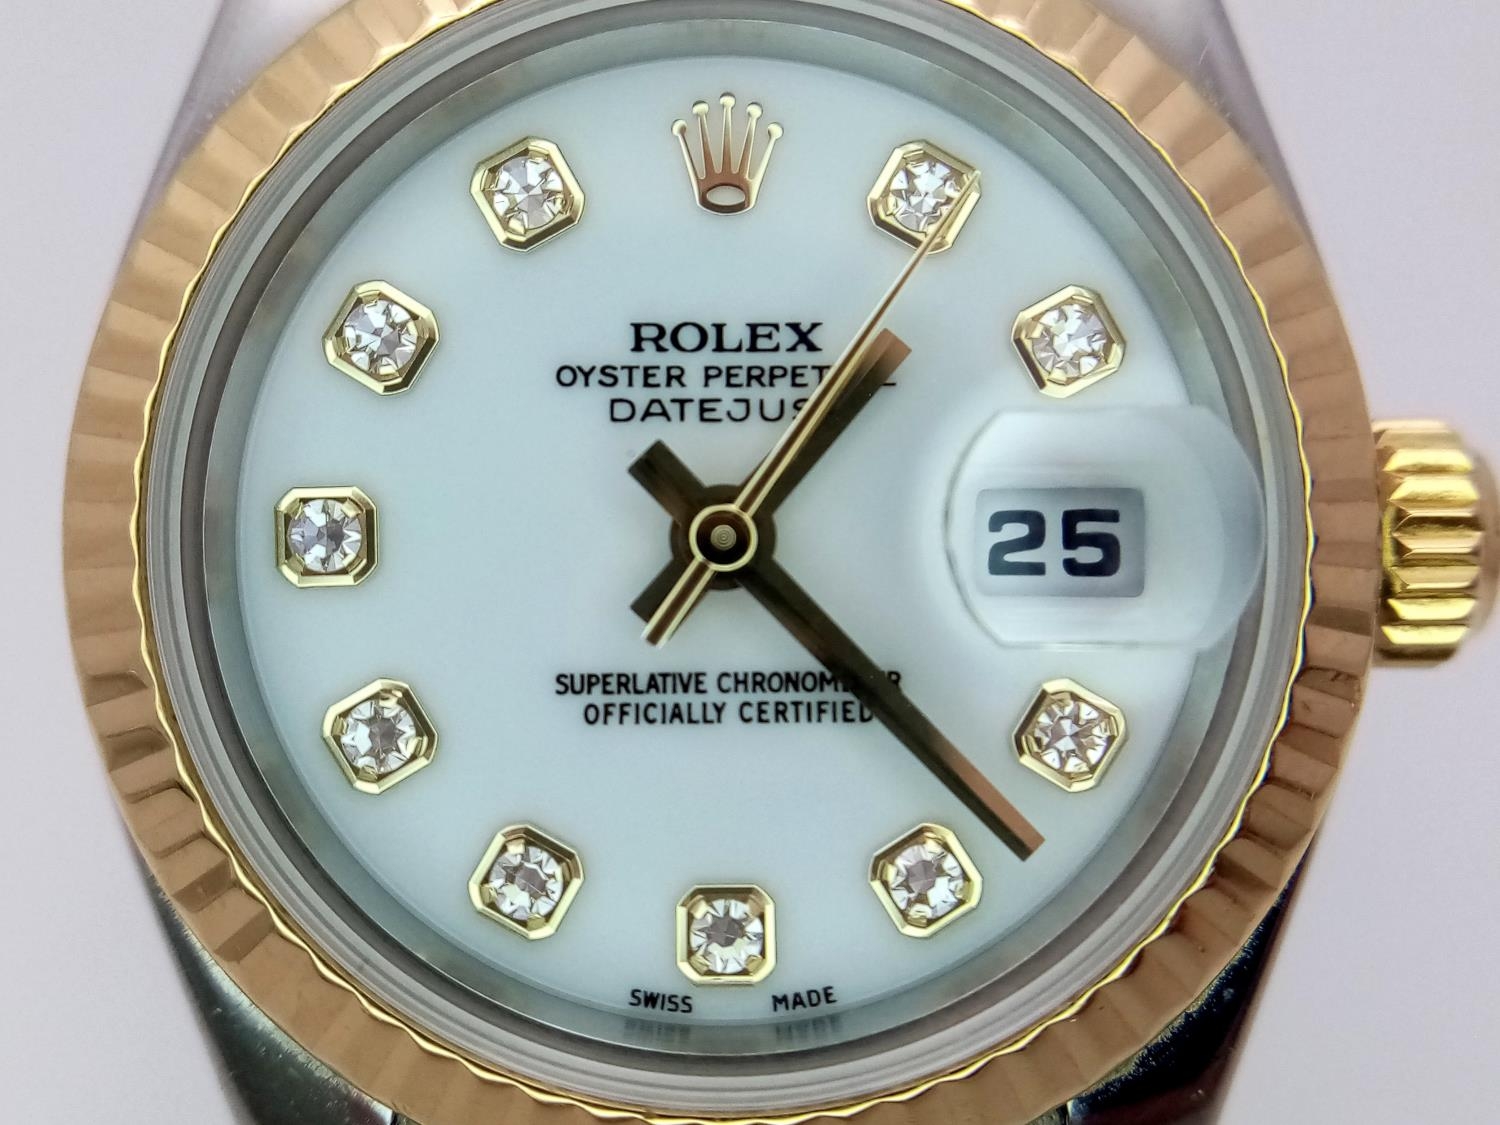 A Rolex Oyster Perpetual Datejust, Diamond Bi-Metal Ladies Watch. 18k gold and stainless steel - Image 3 of 9